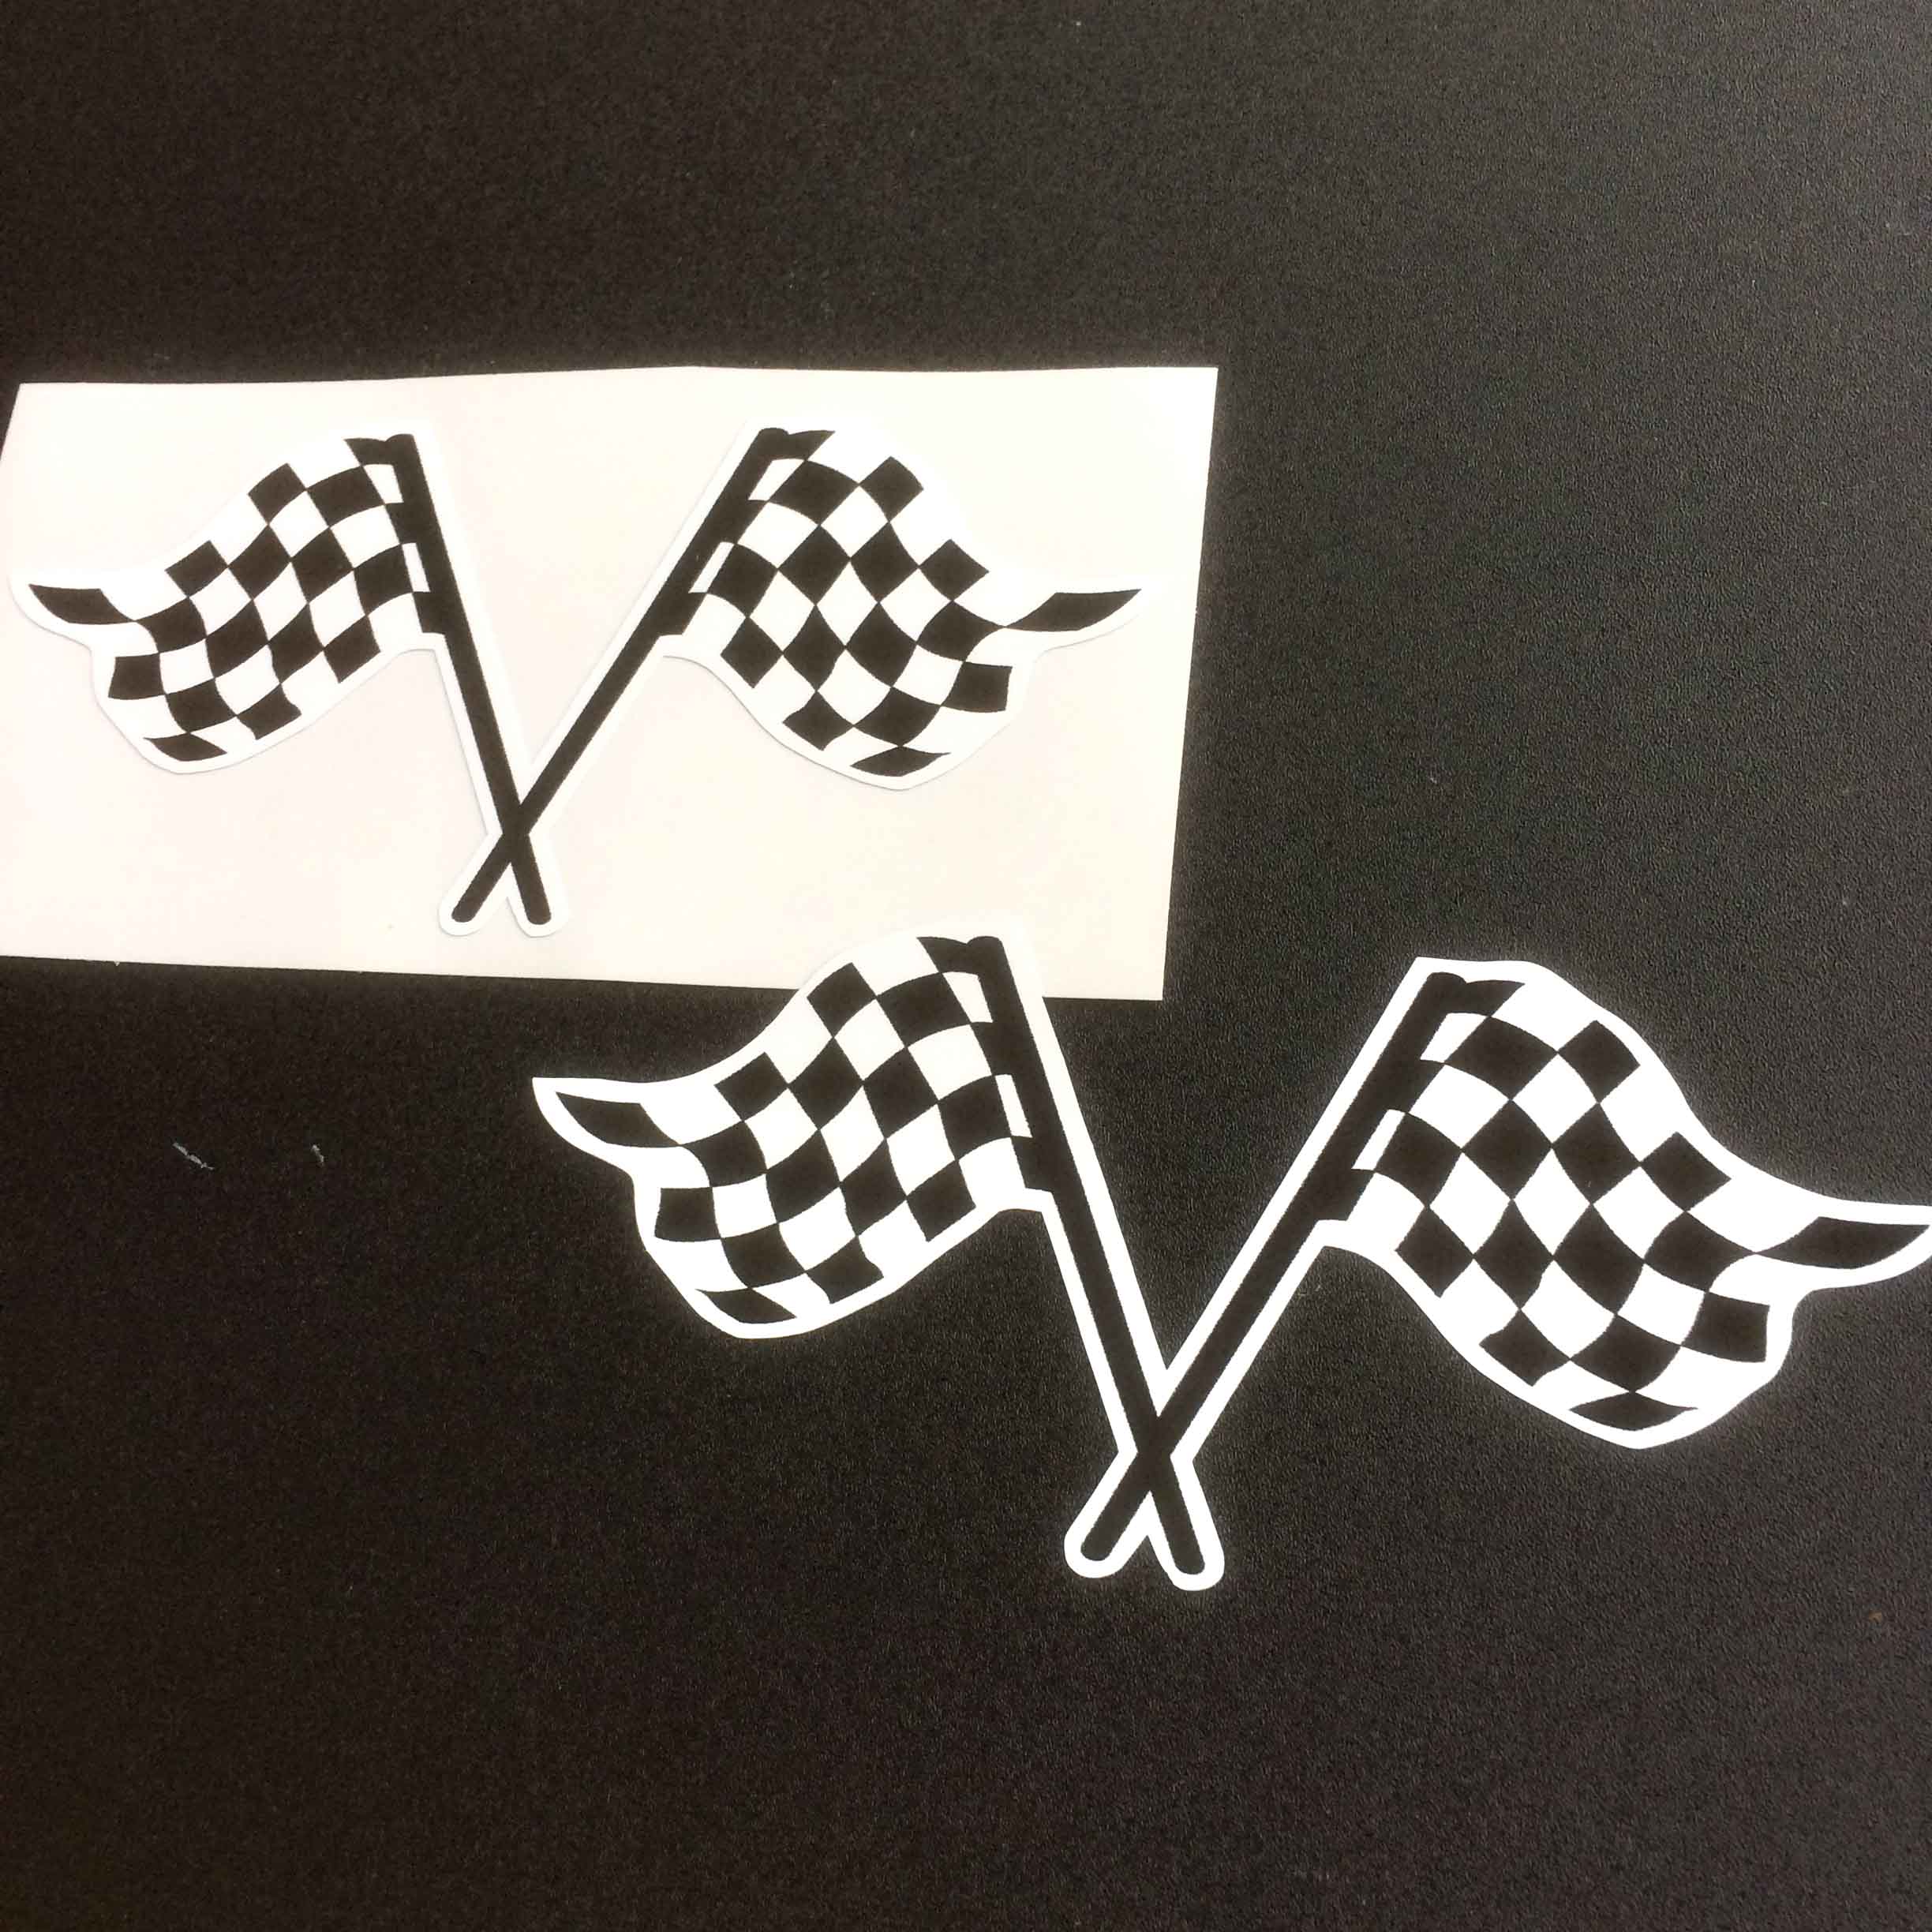 CHEQUERED FLAGS STICKERS. Two crossed black and white chequered flags on poles.